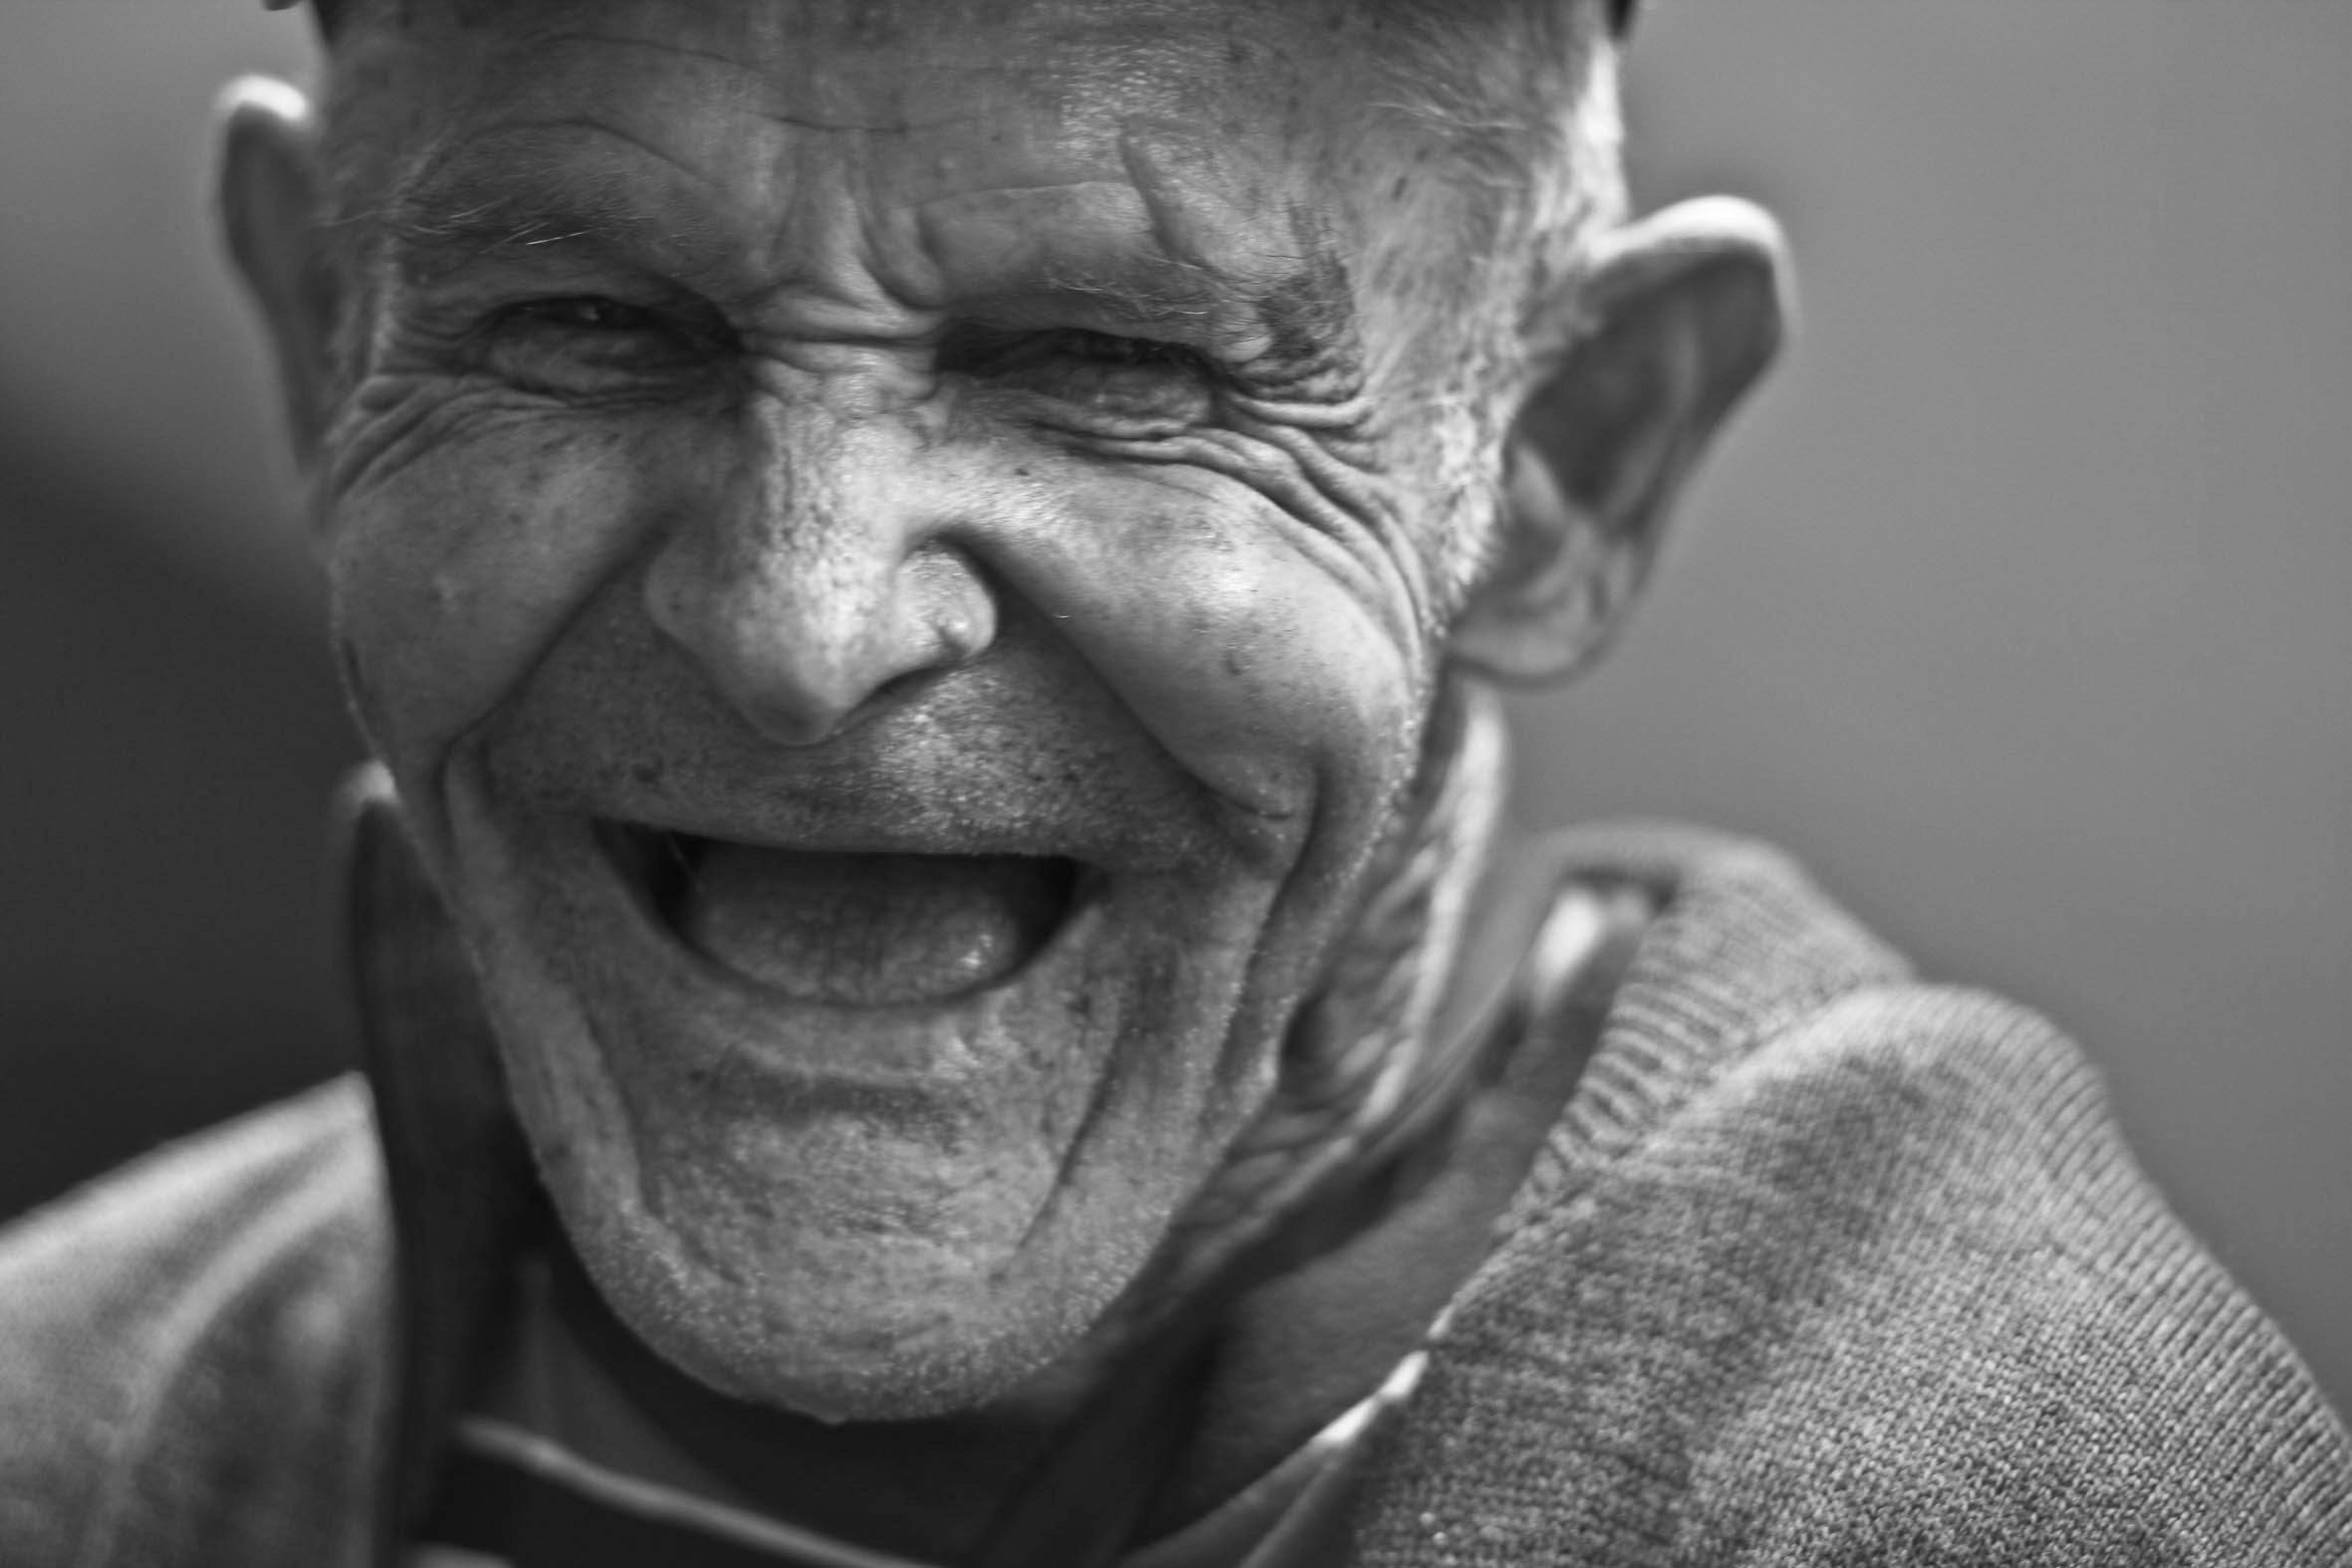 A jolly old man. | Source: Pexels